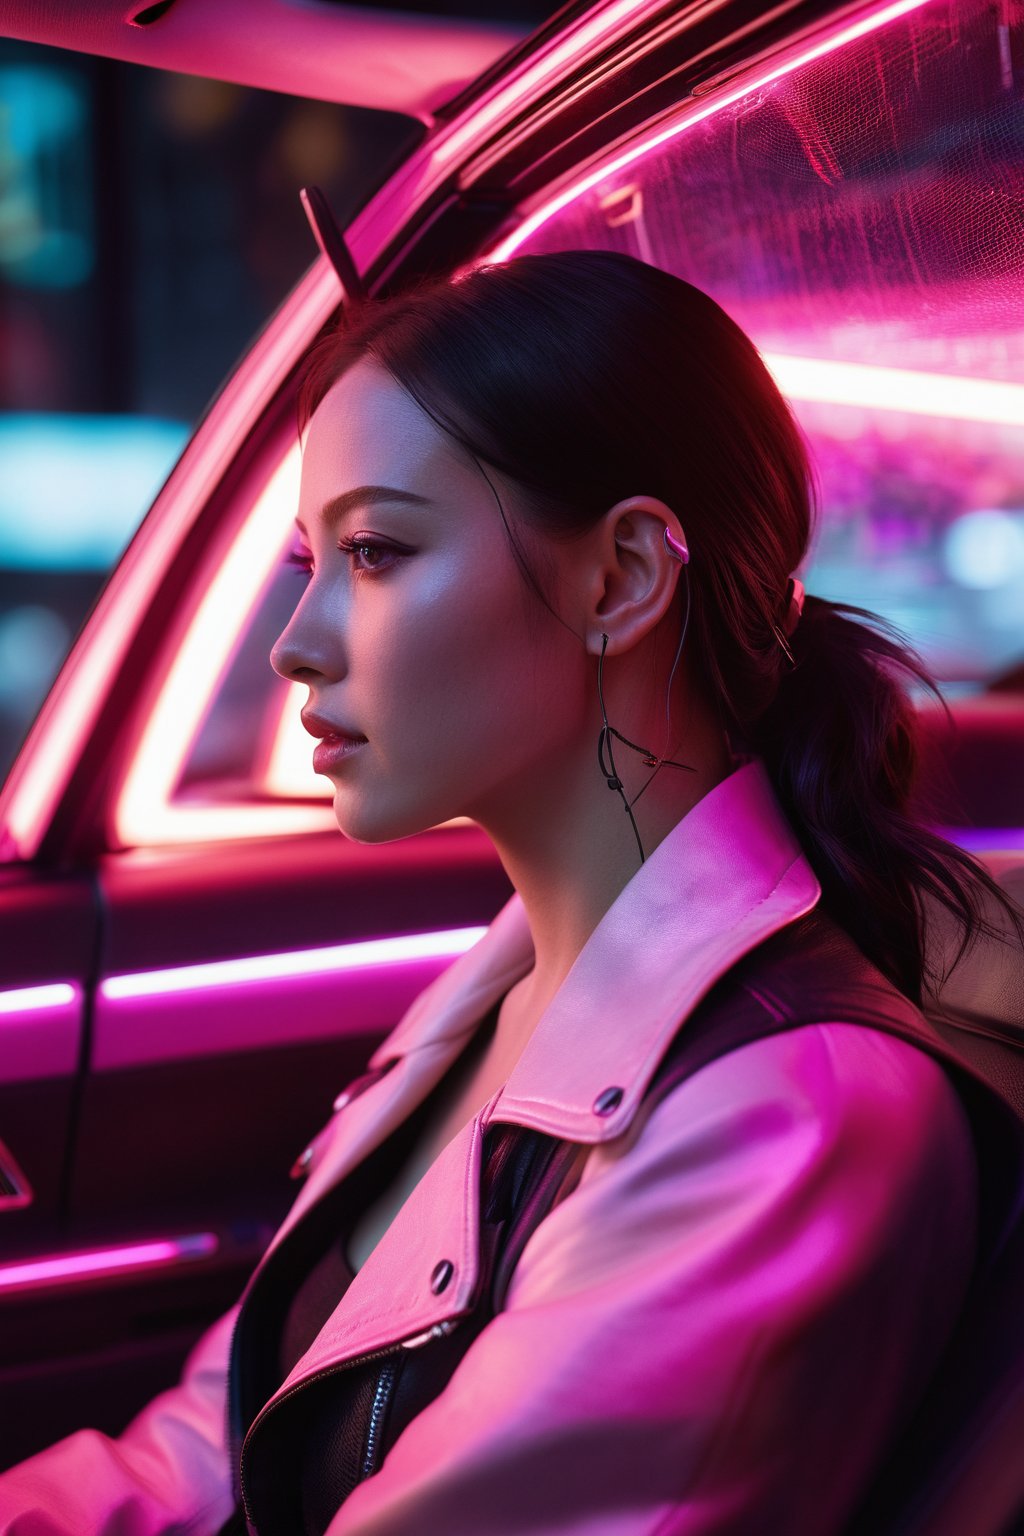 (ultra realistic,best quality),photorealistic,Extremely Realistic, in depth, cinematic light,hubgwomen,hubg_beauty_girl,

car, from side, , cyberpunk, neon lights, pink theme, indoors, transparent

intricate background, realism,realistic,raw,analog,portrait,photorealistic